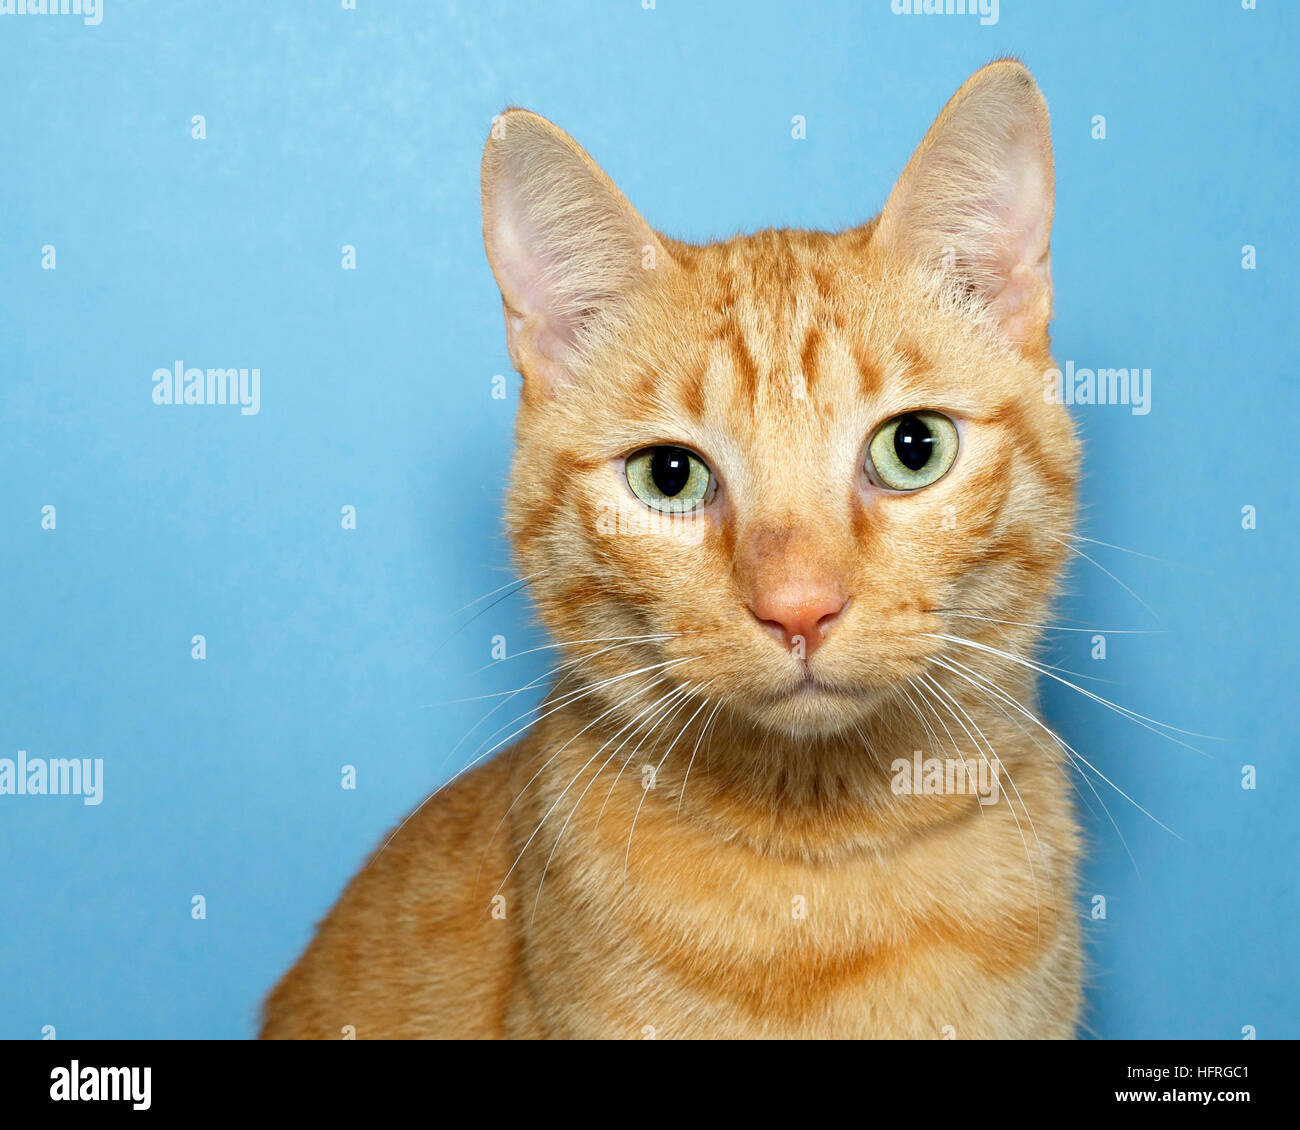 Portrait Orange Tabby Cat On Blue Background With Yellow Green Eyes Looking Straight Ahead Copy Space Stock Photo Alamy